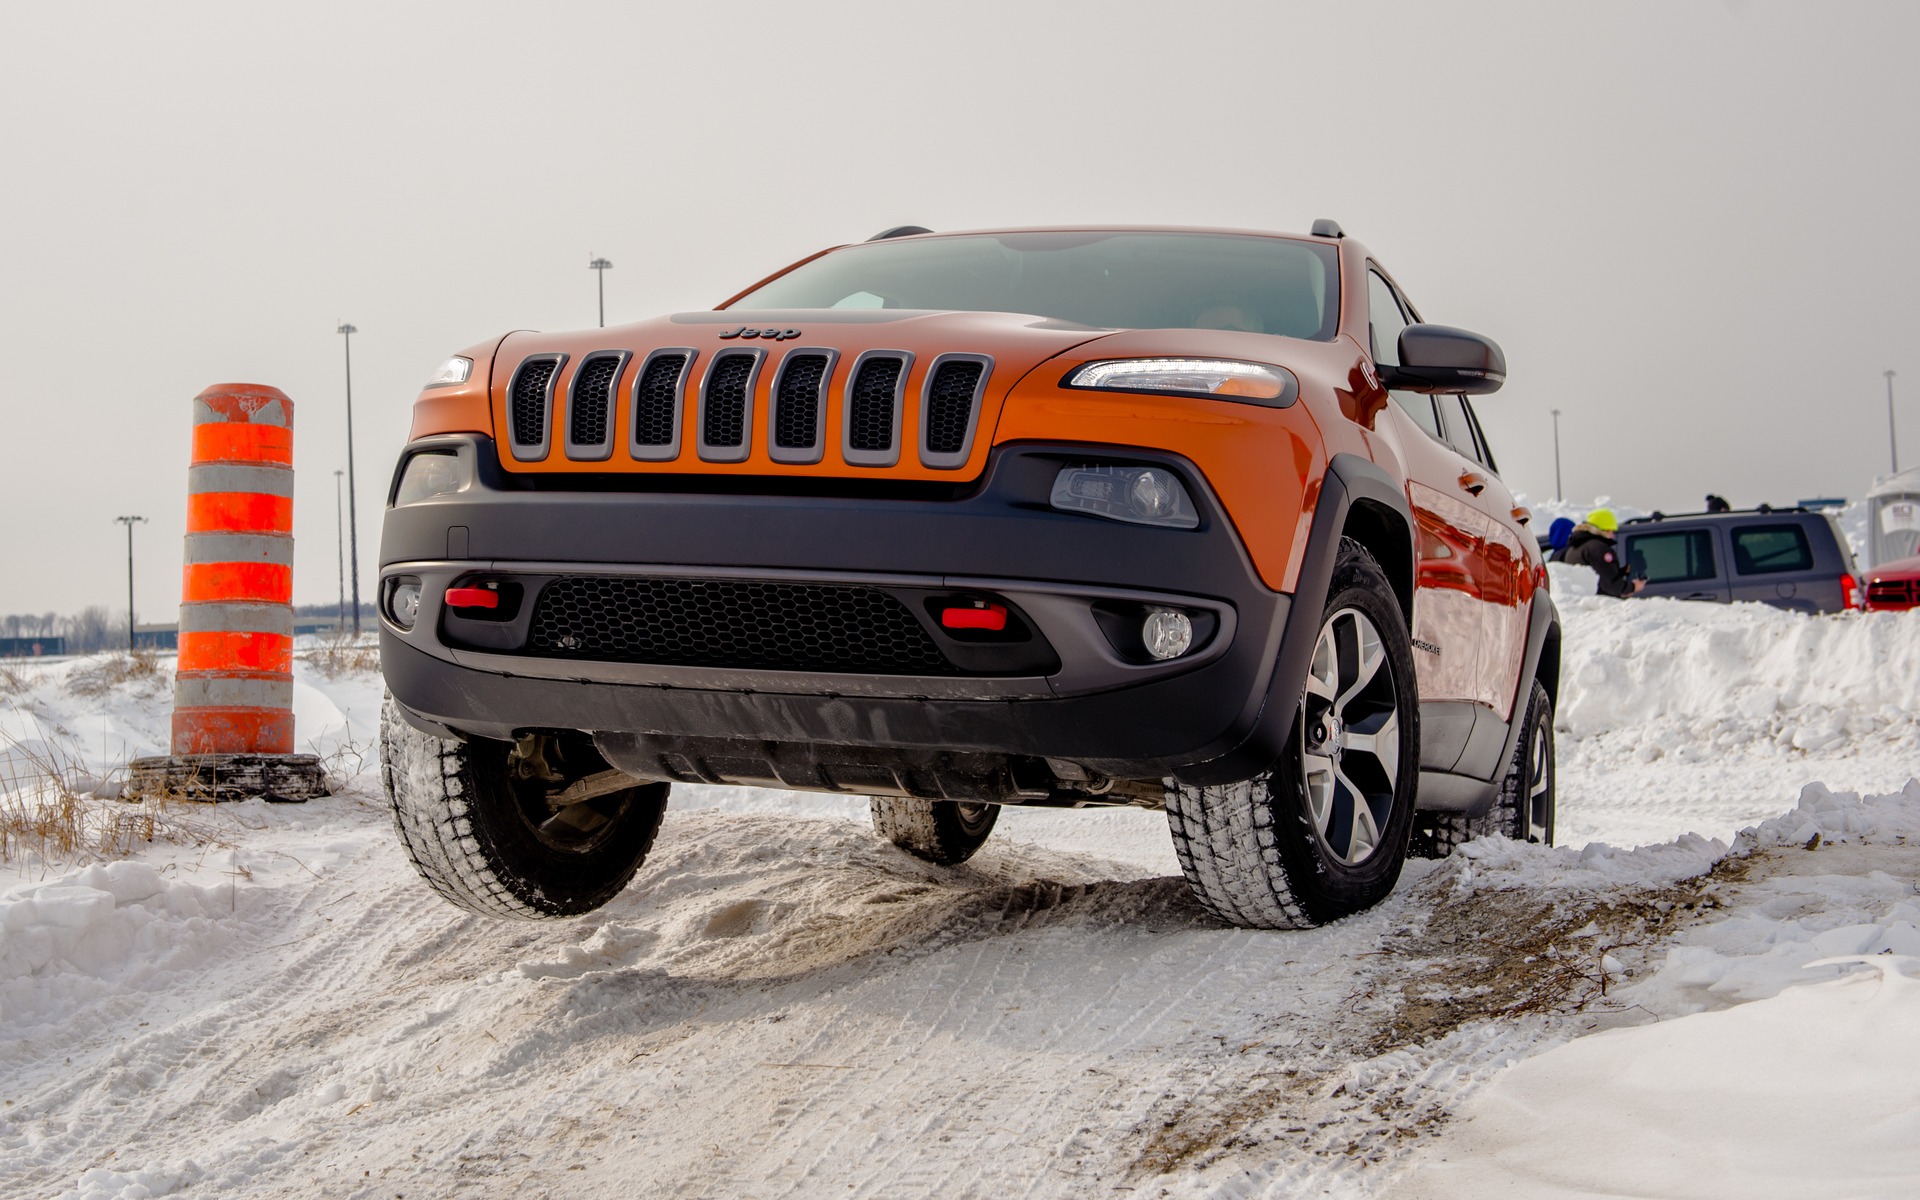 The Cherokee brings a trio of four-wheel drive systems to the table.